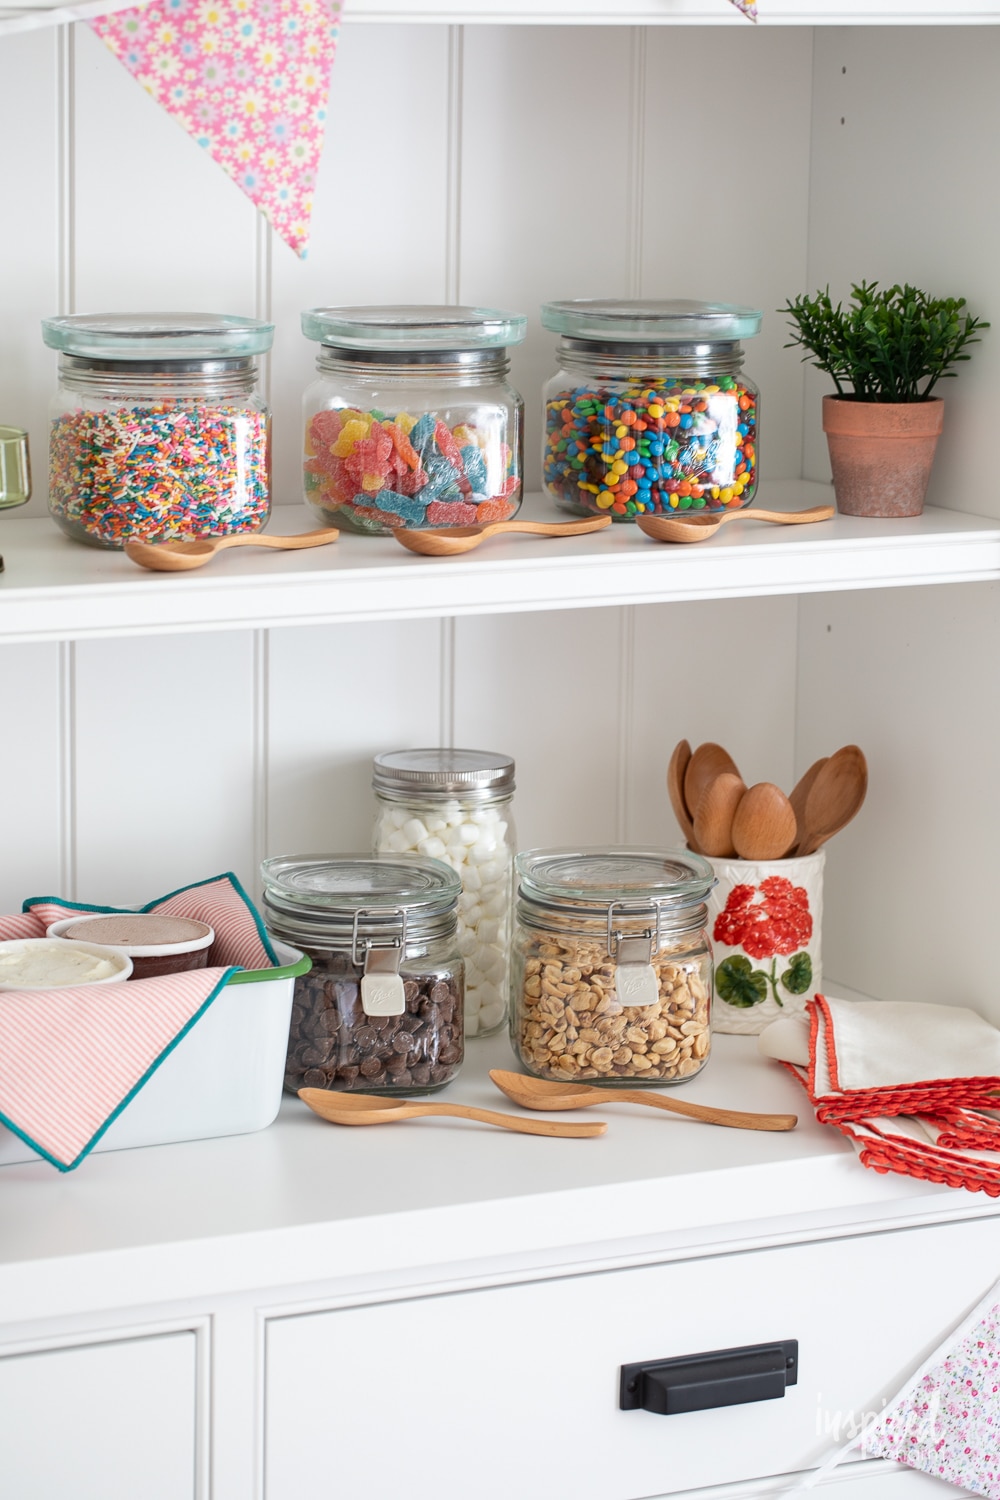 toppings for an ice cream sundae bar display in glass storage jars. 